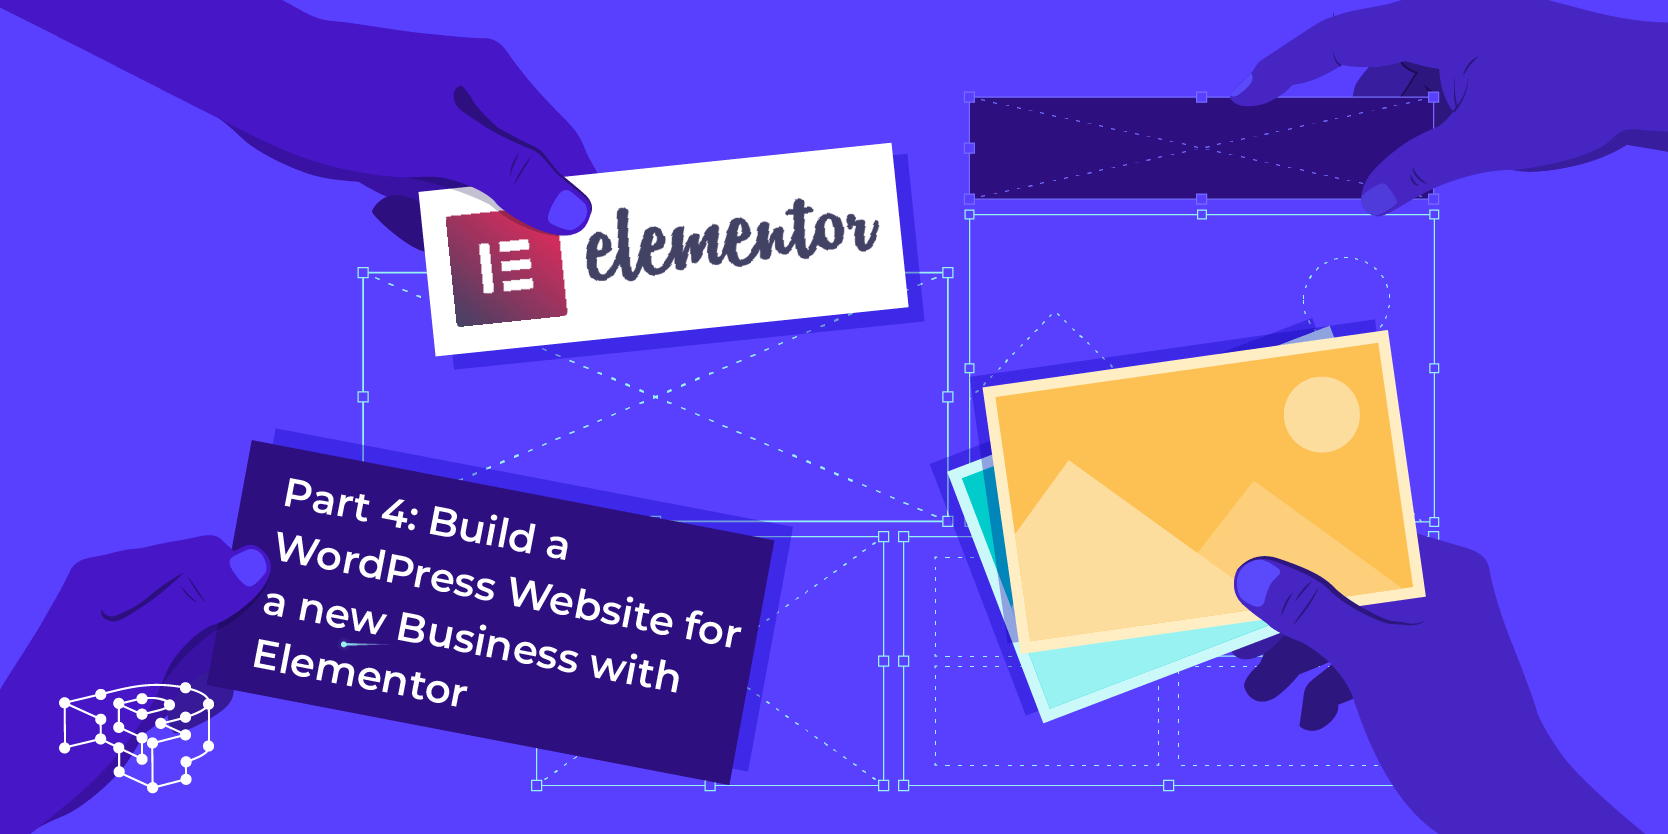 Image for Part 4: Build a WordPress Website for a new Business with Elementor